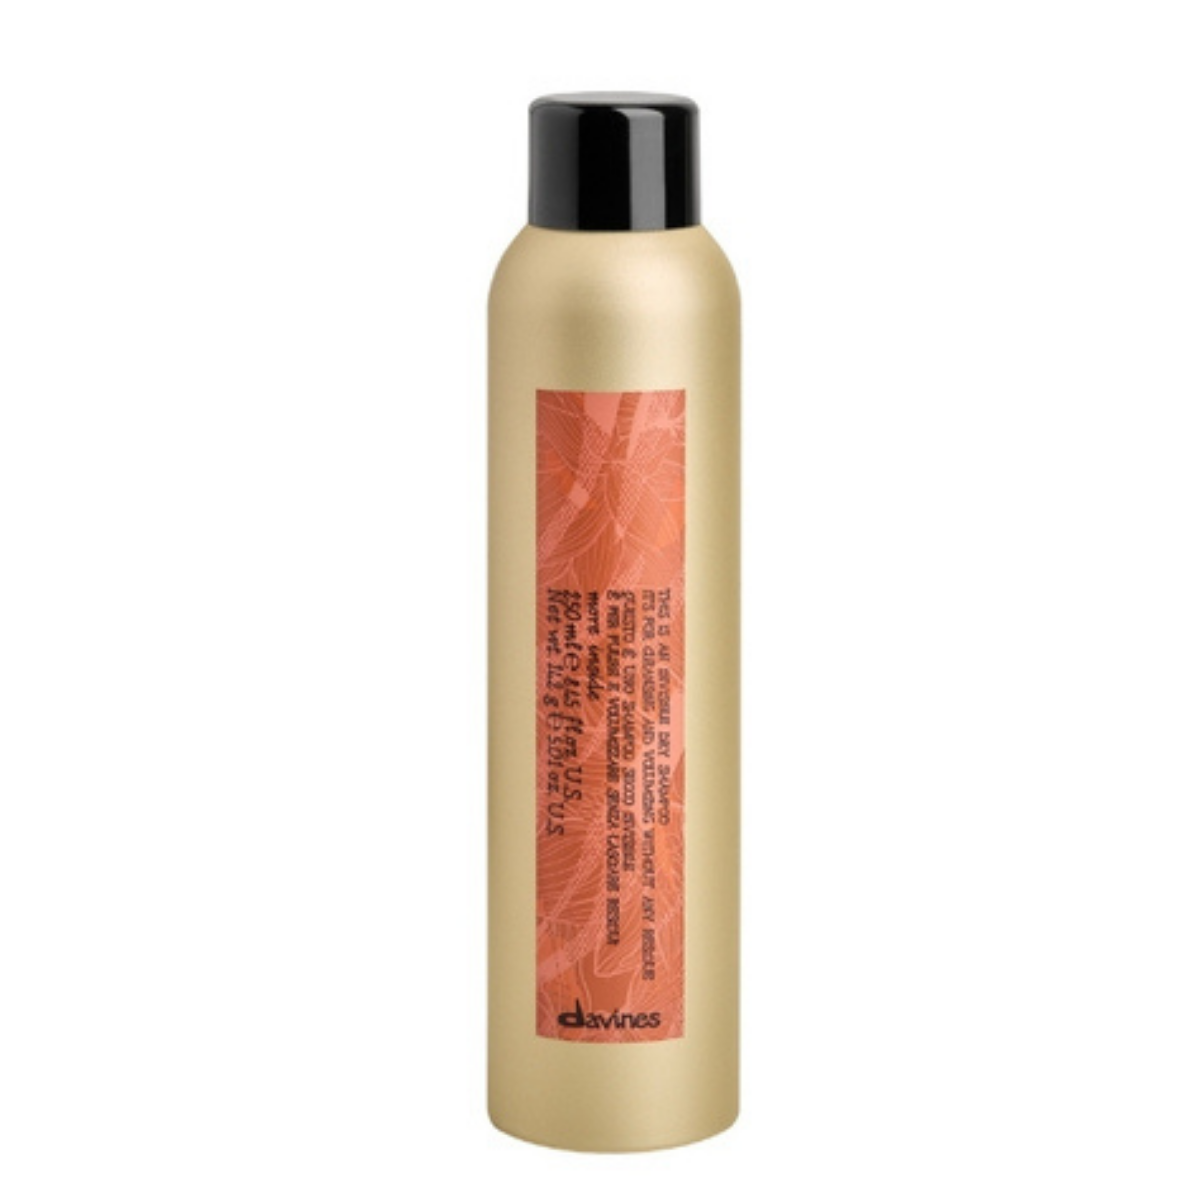 Davines This is Invisible Dry Shampoo